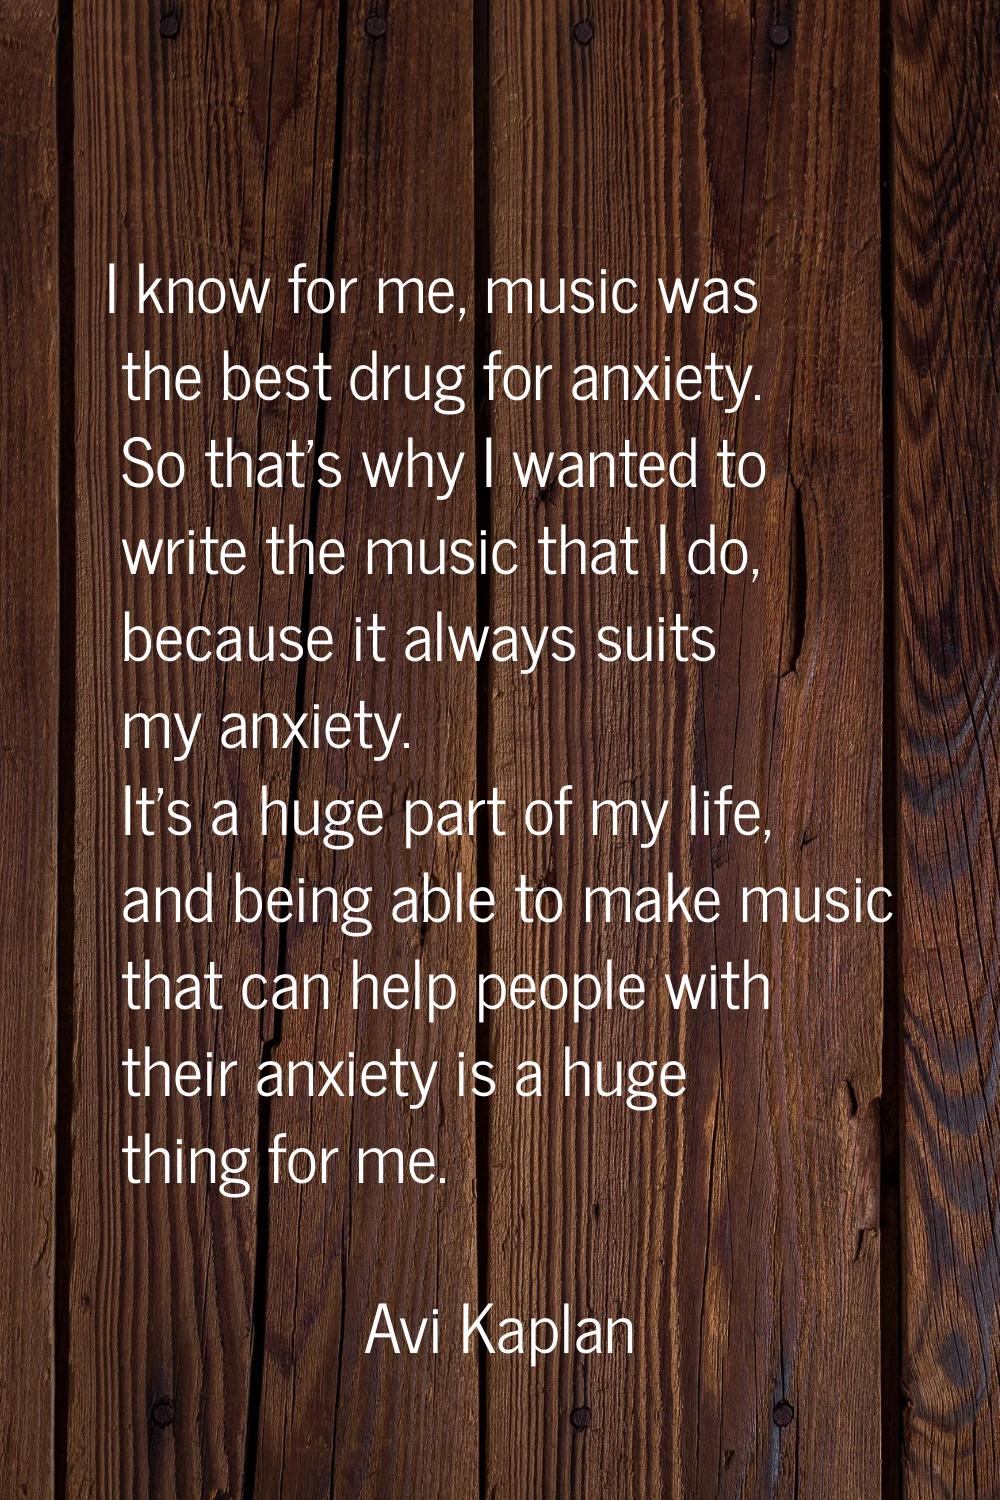 I know for me, music was the best drug for anxiety. So that's why I wanted to write the music that 